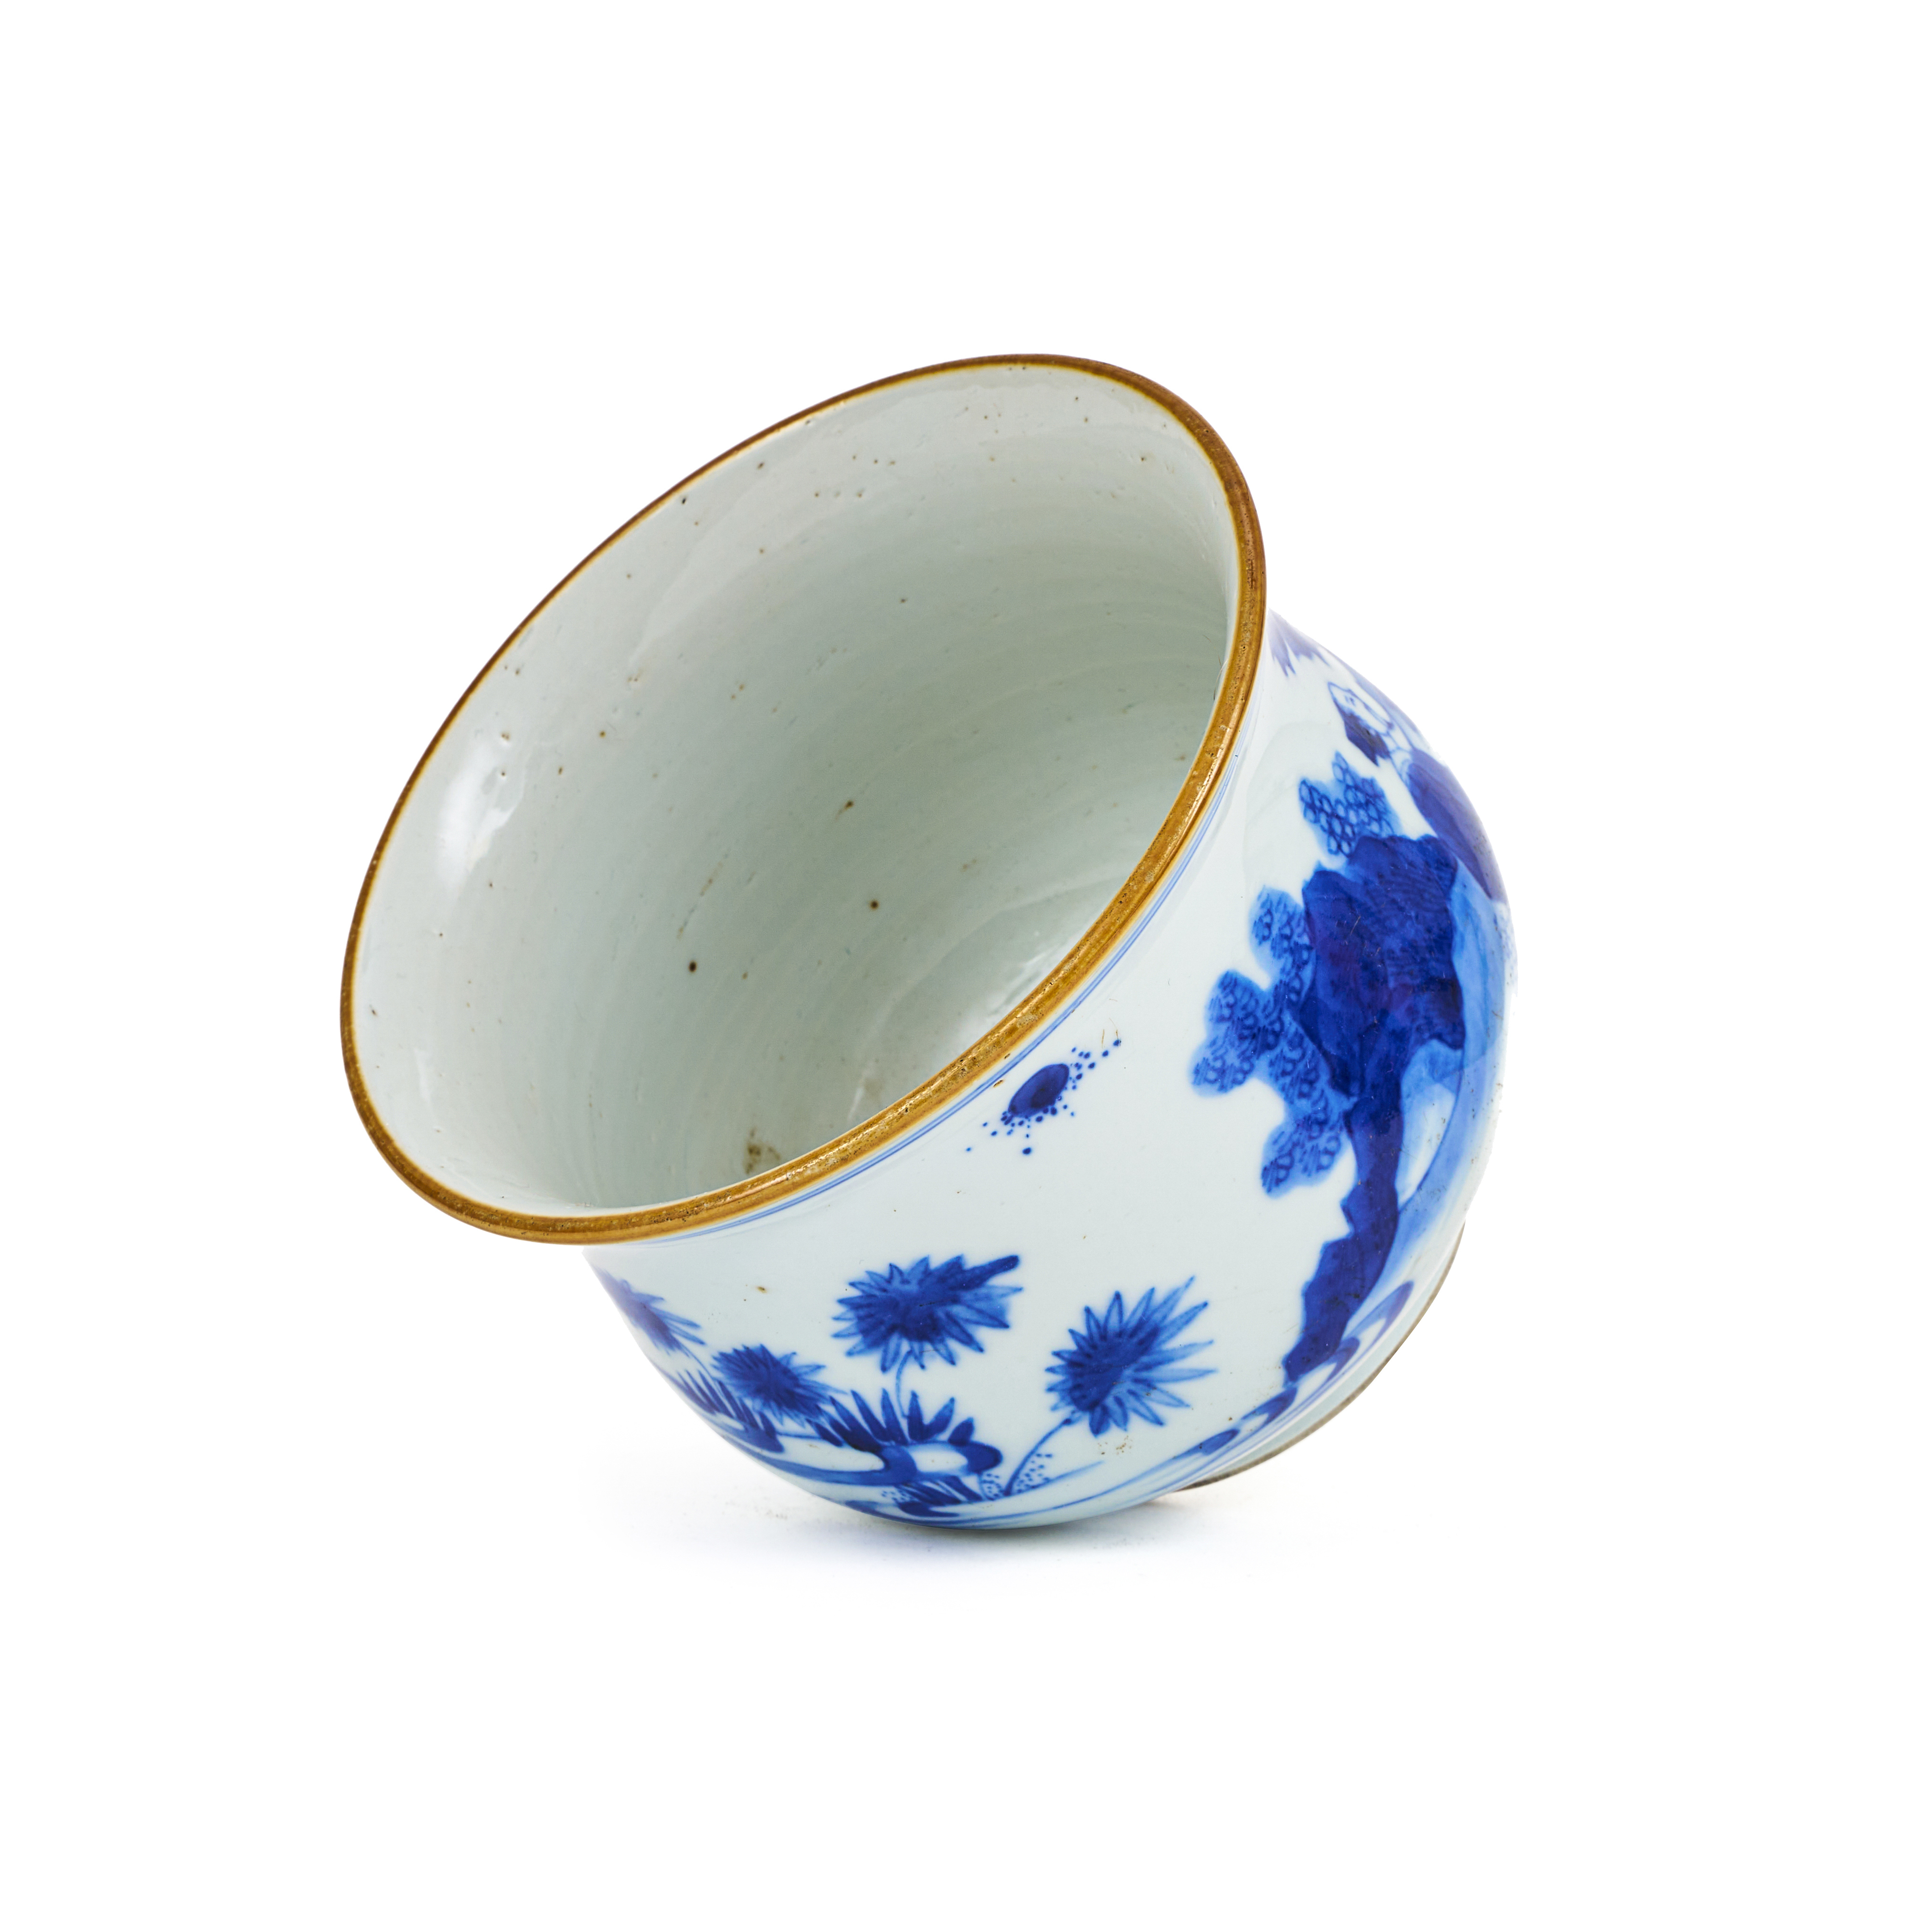 A CHINESE BLUE & WHITE CENSER, QING DYNASTY (1644-1911) - Image 3 of 4